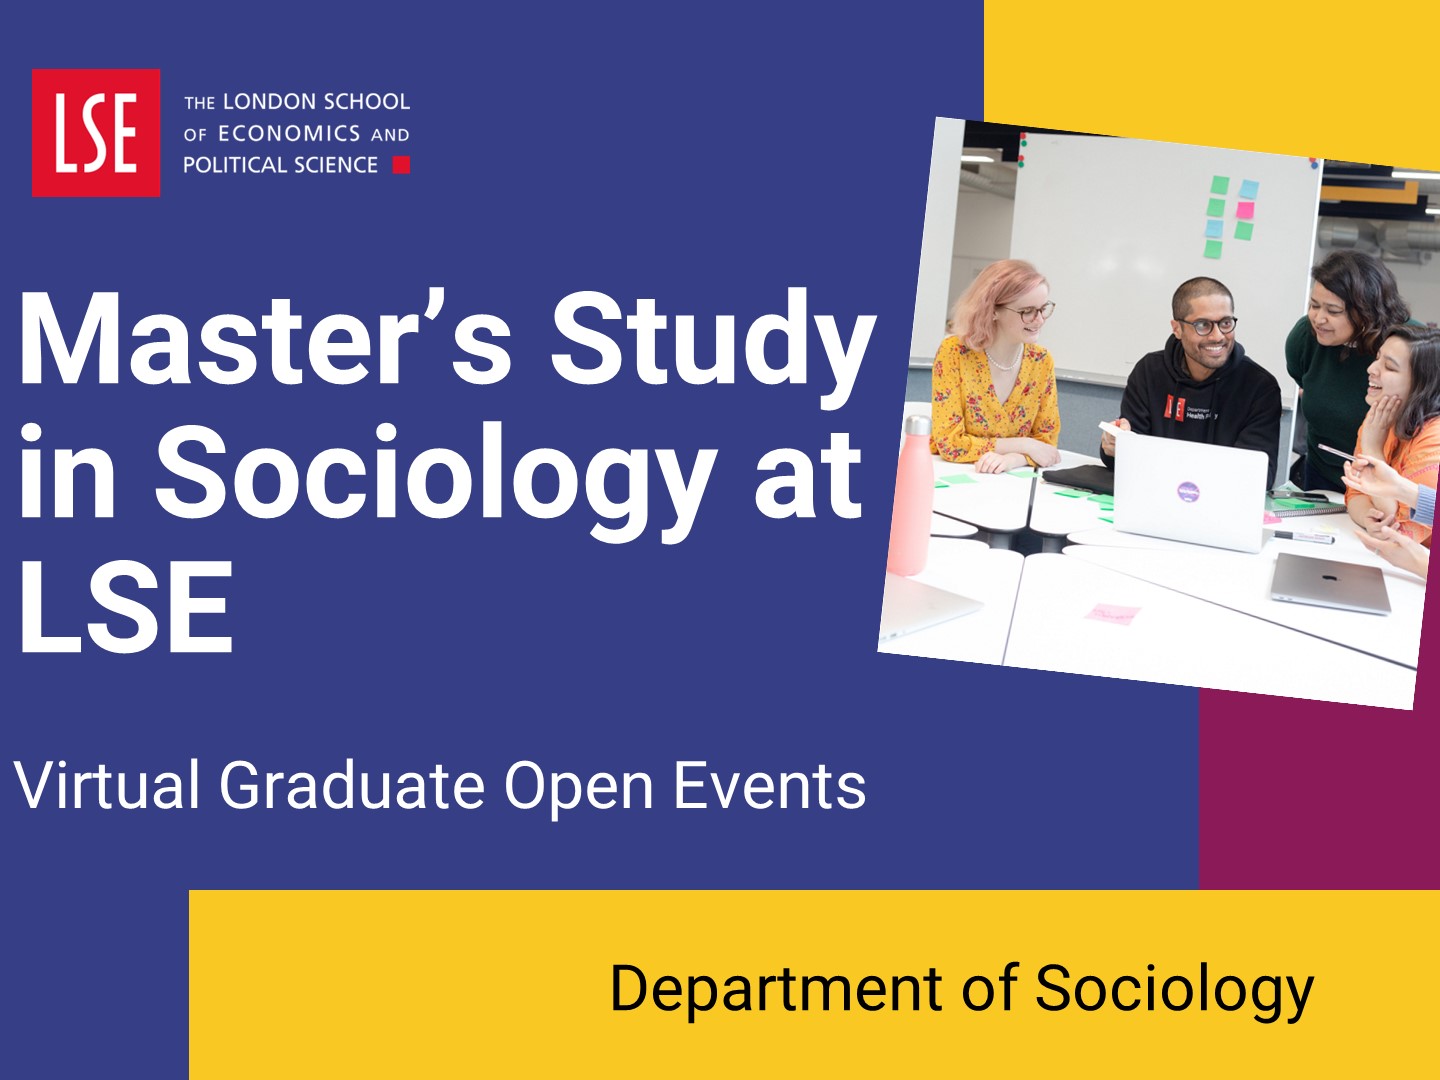 Introduction to master's study in sociology at LSE